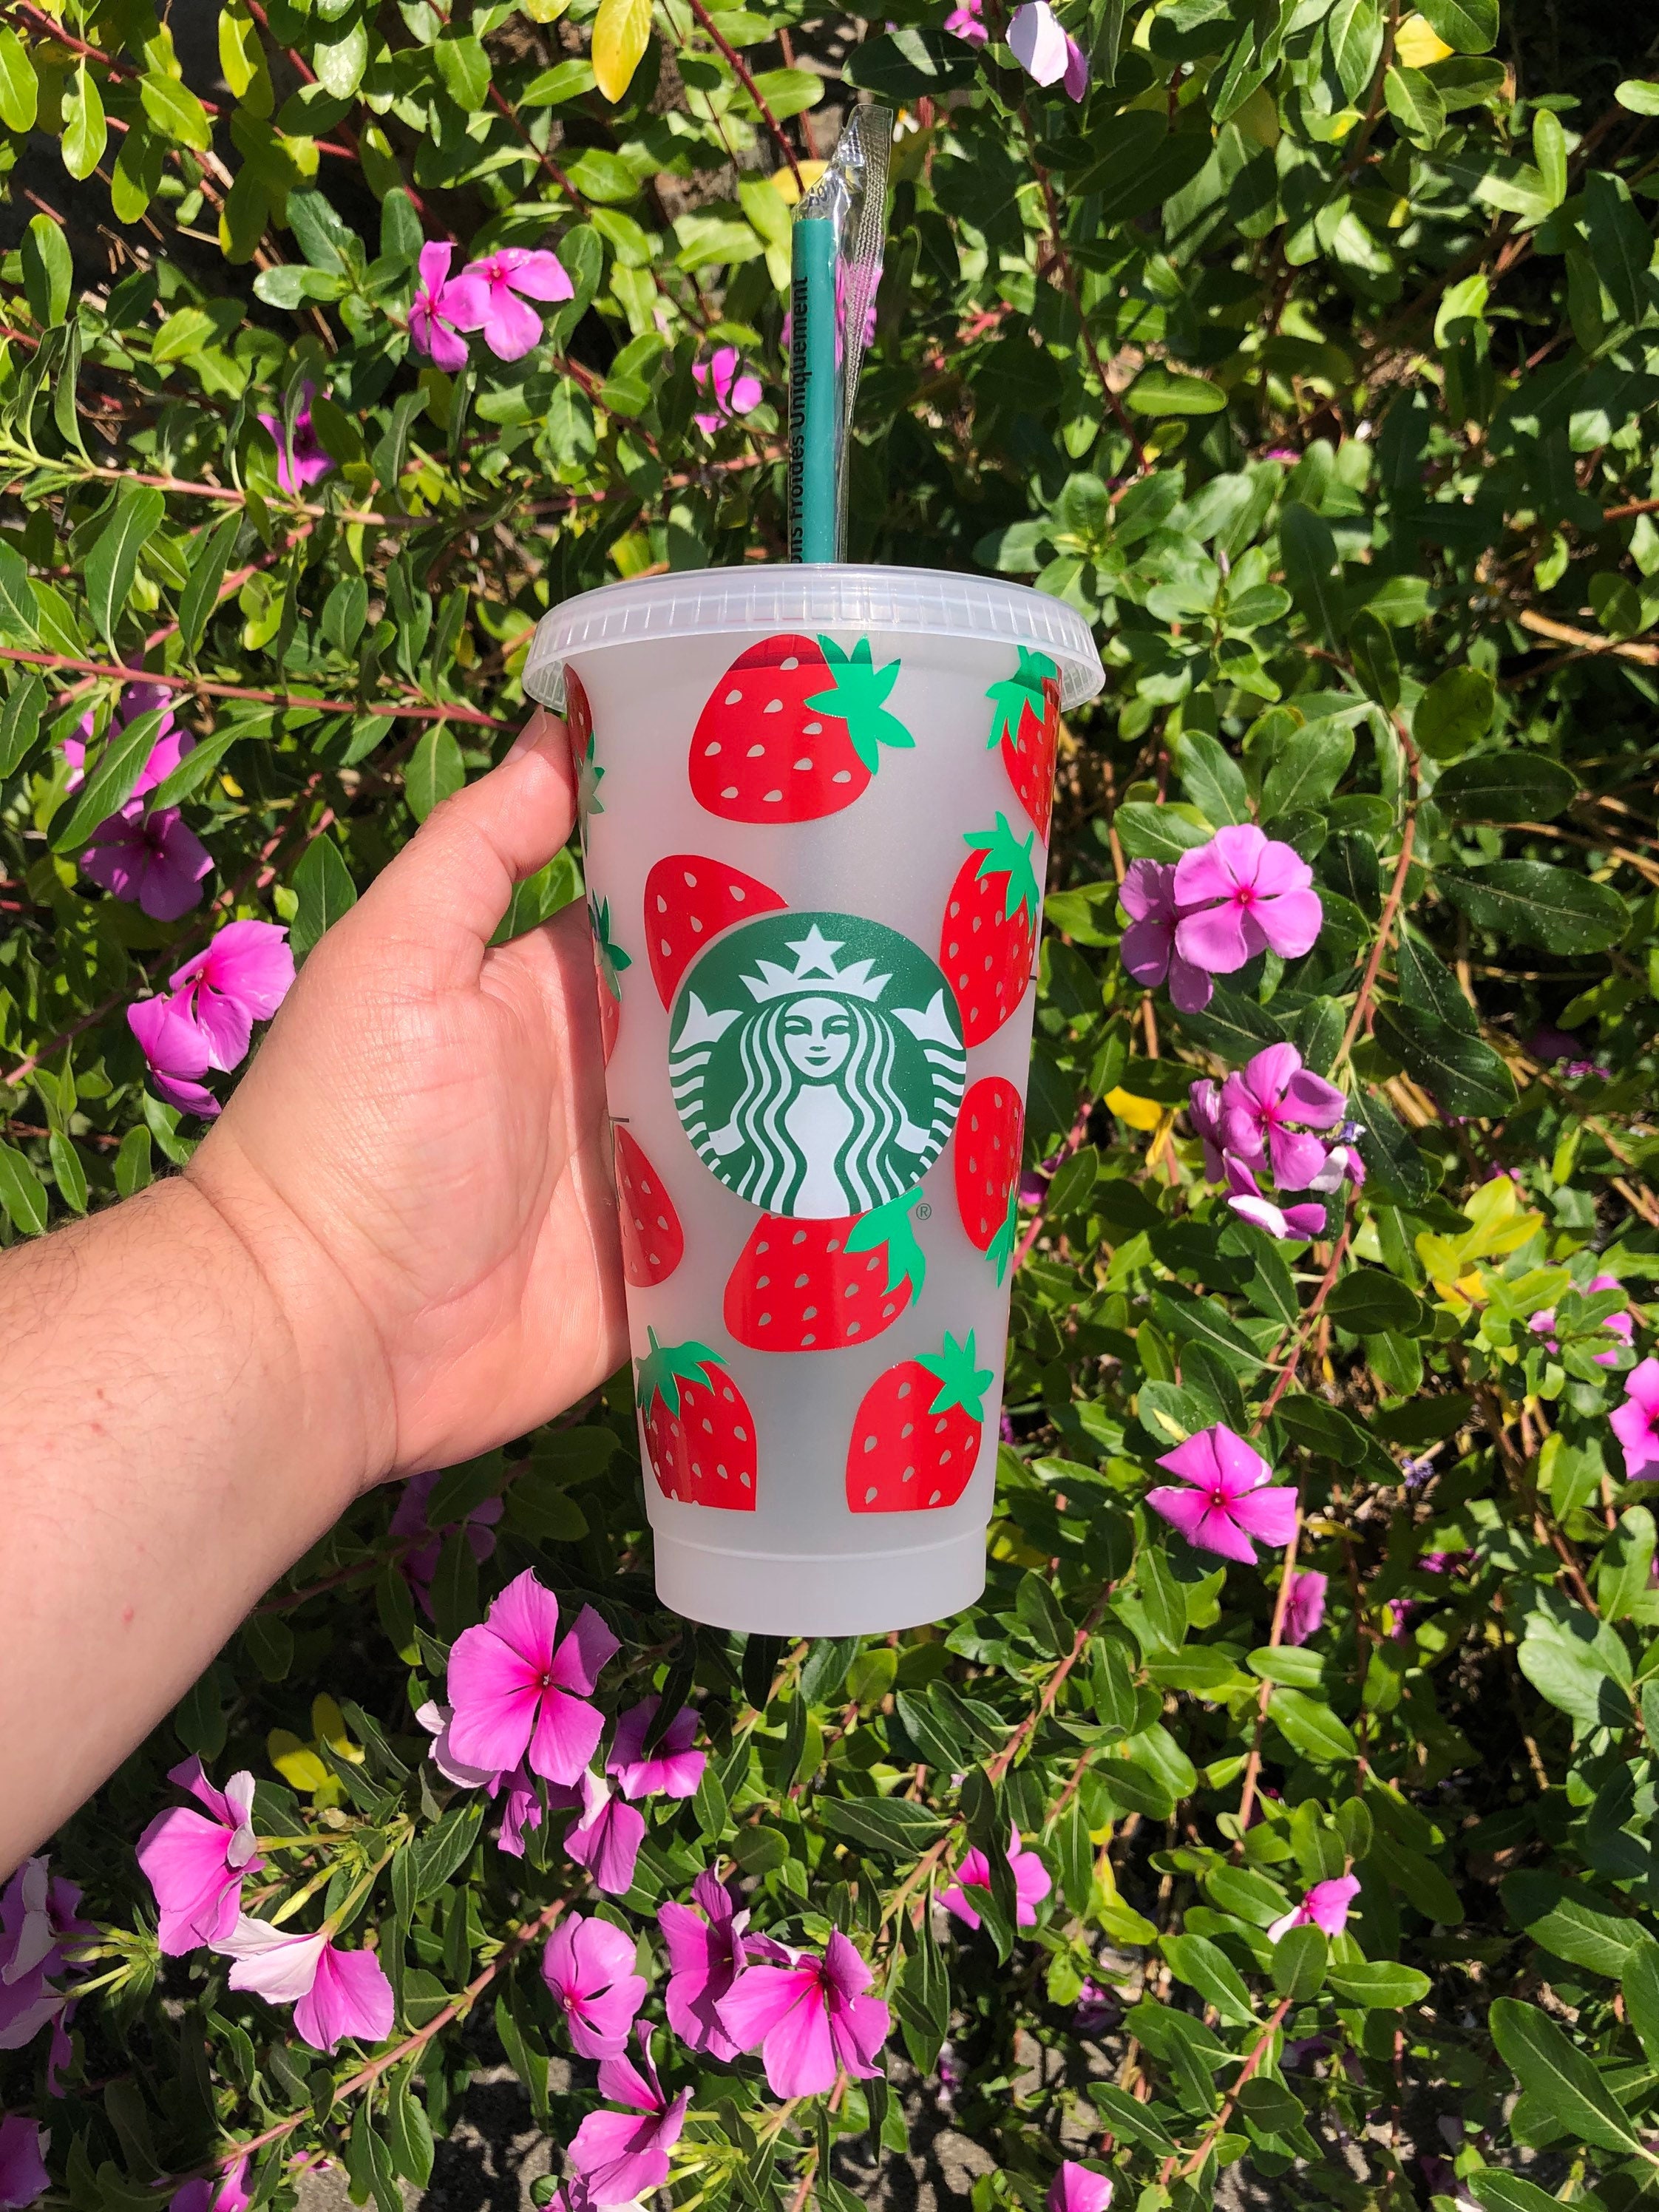 Cute Cherry Starbucks Cup / Cherries Tumbler Cup / Girlfriend Gift / Gift  for Her / Mom Gift / Iced Coffee Cup / Fun Gift / Coffee Gift 